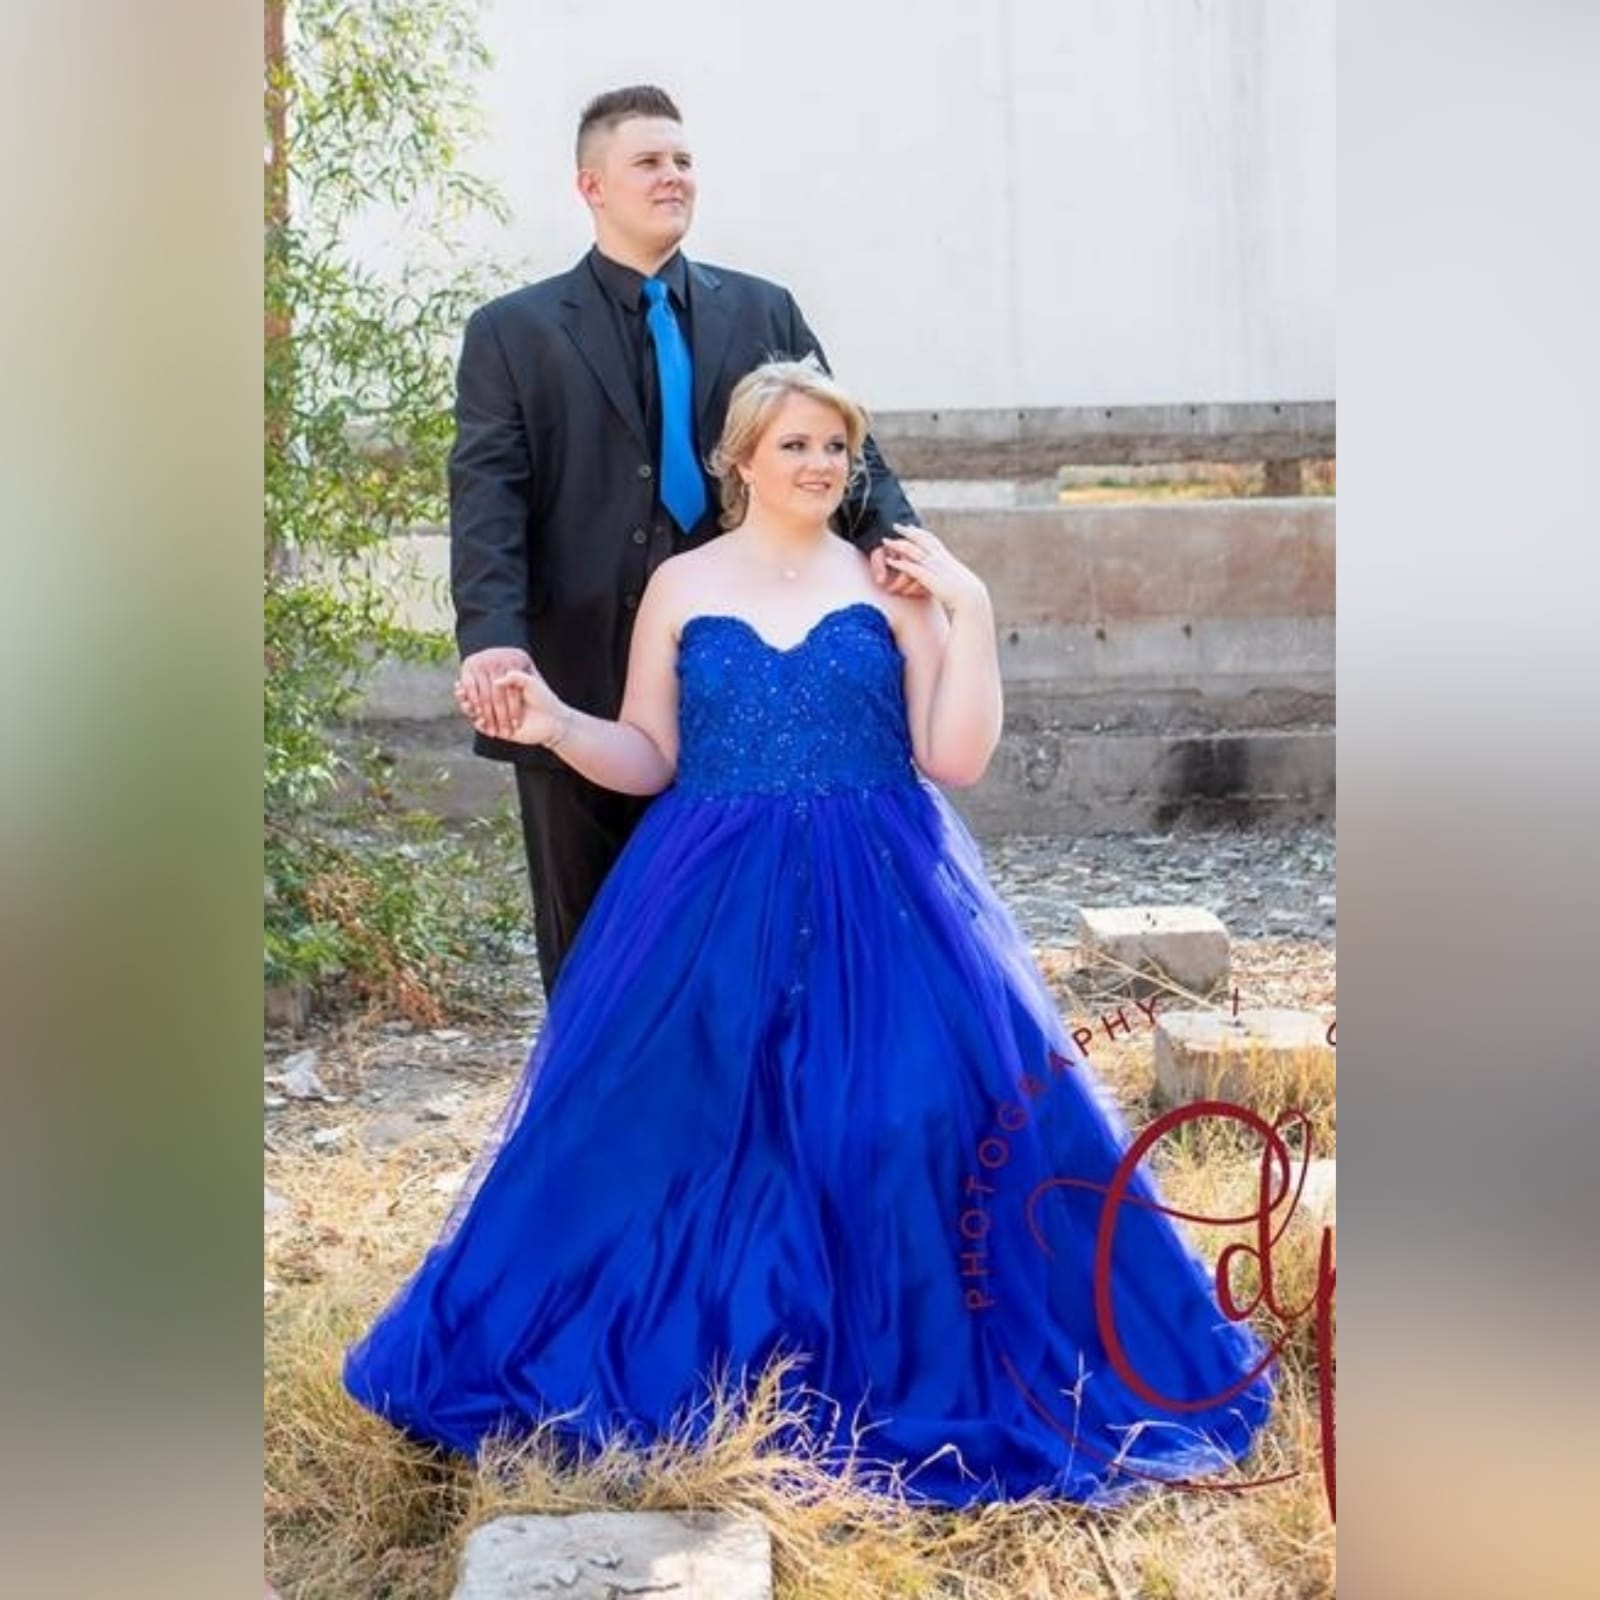 Royal blue boobtube tulle prom dress 2 royal blue boobtube tulle prom dress. Bodice with a sweetheart neckline and detailed with beaded lace falling onto the tulle skirt.